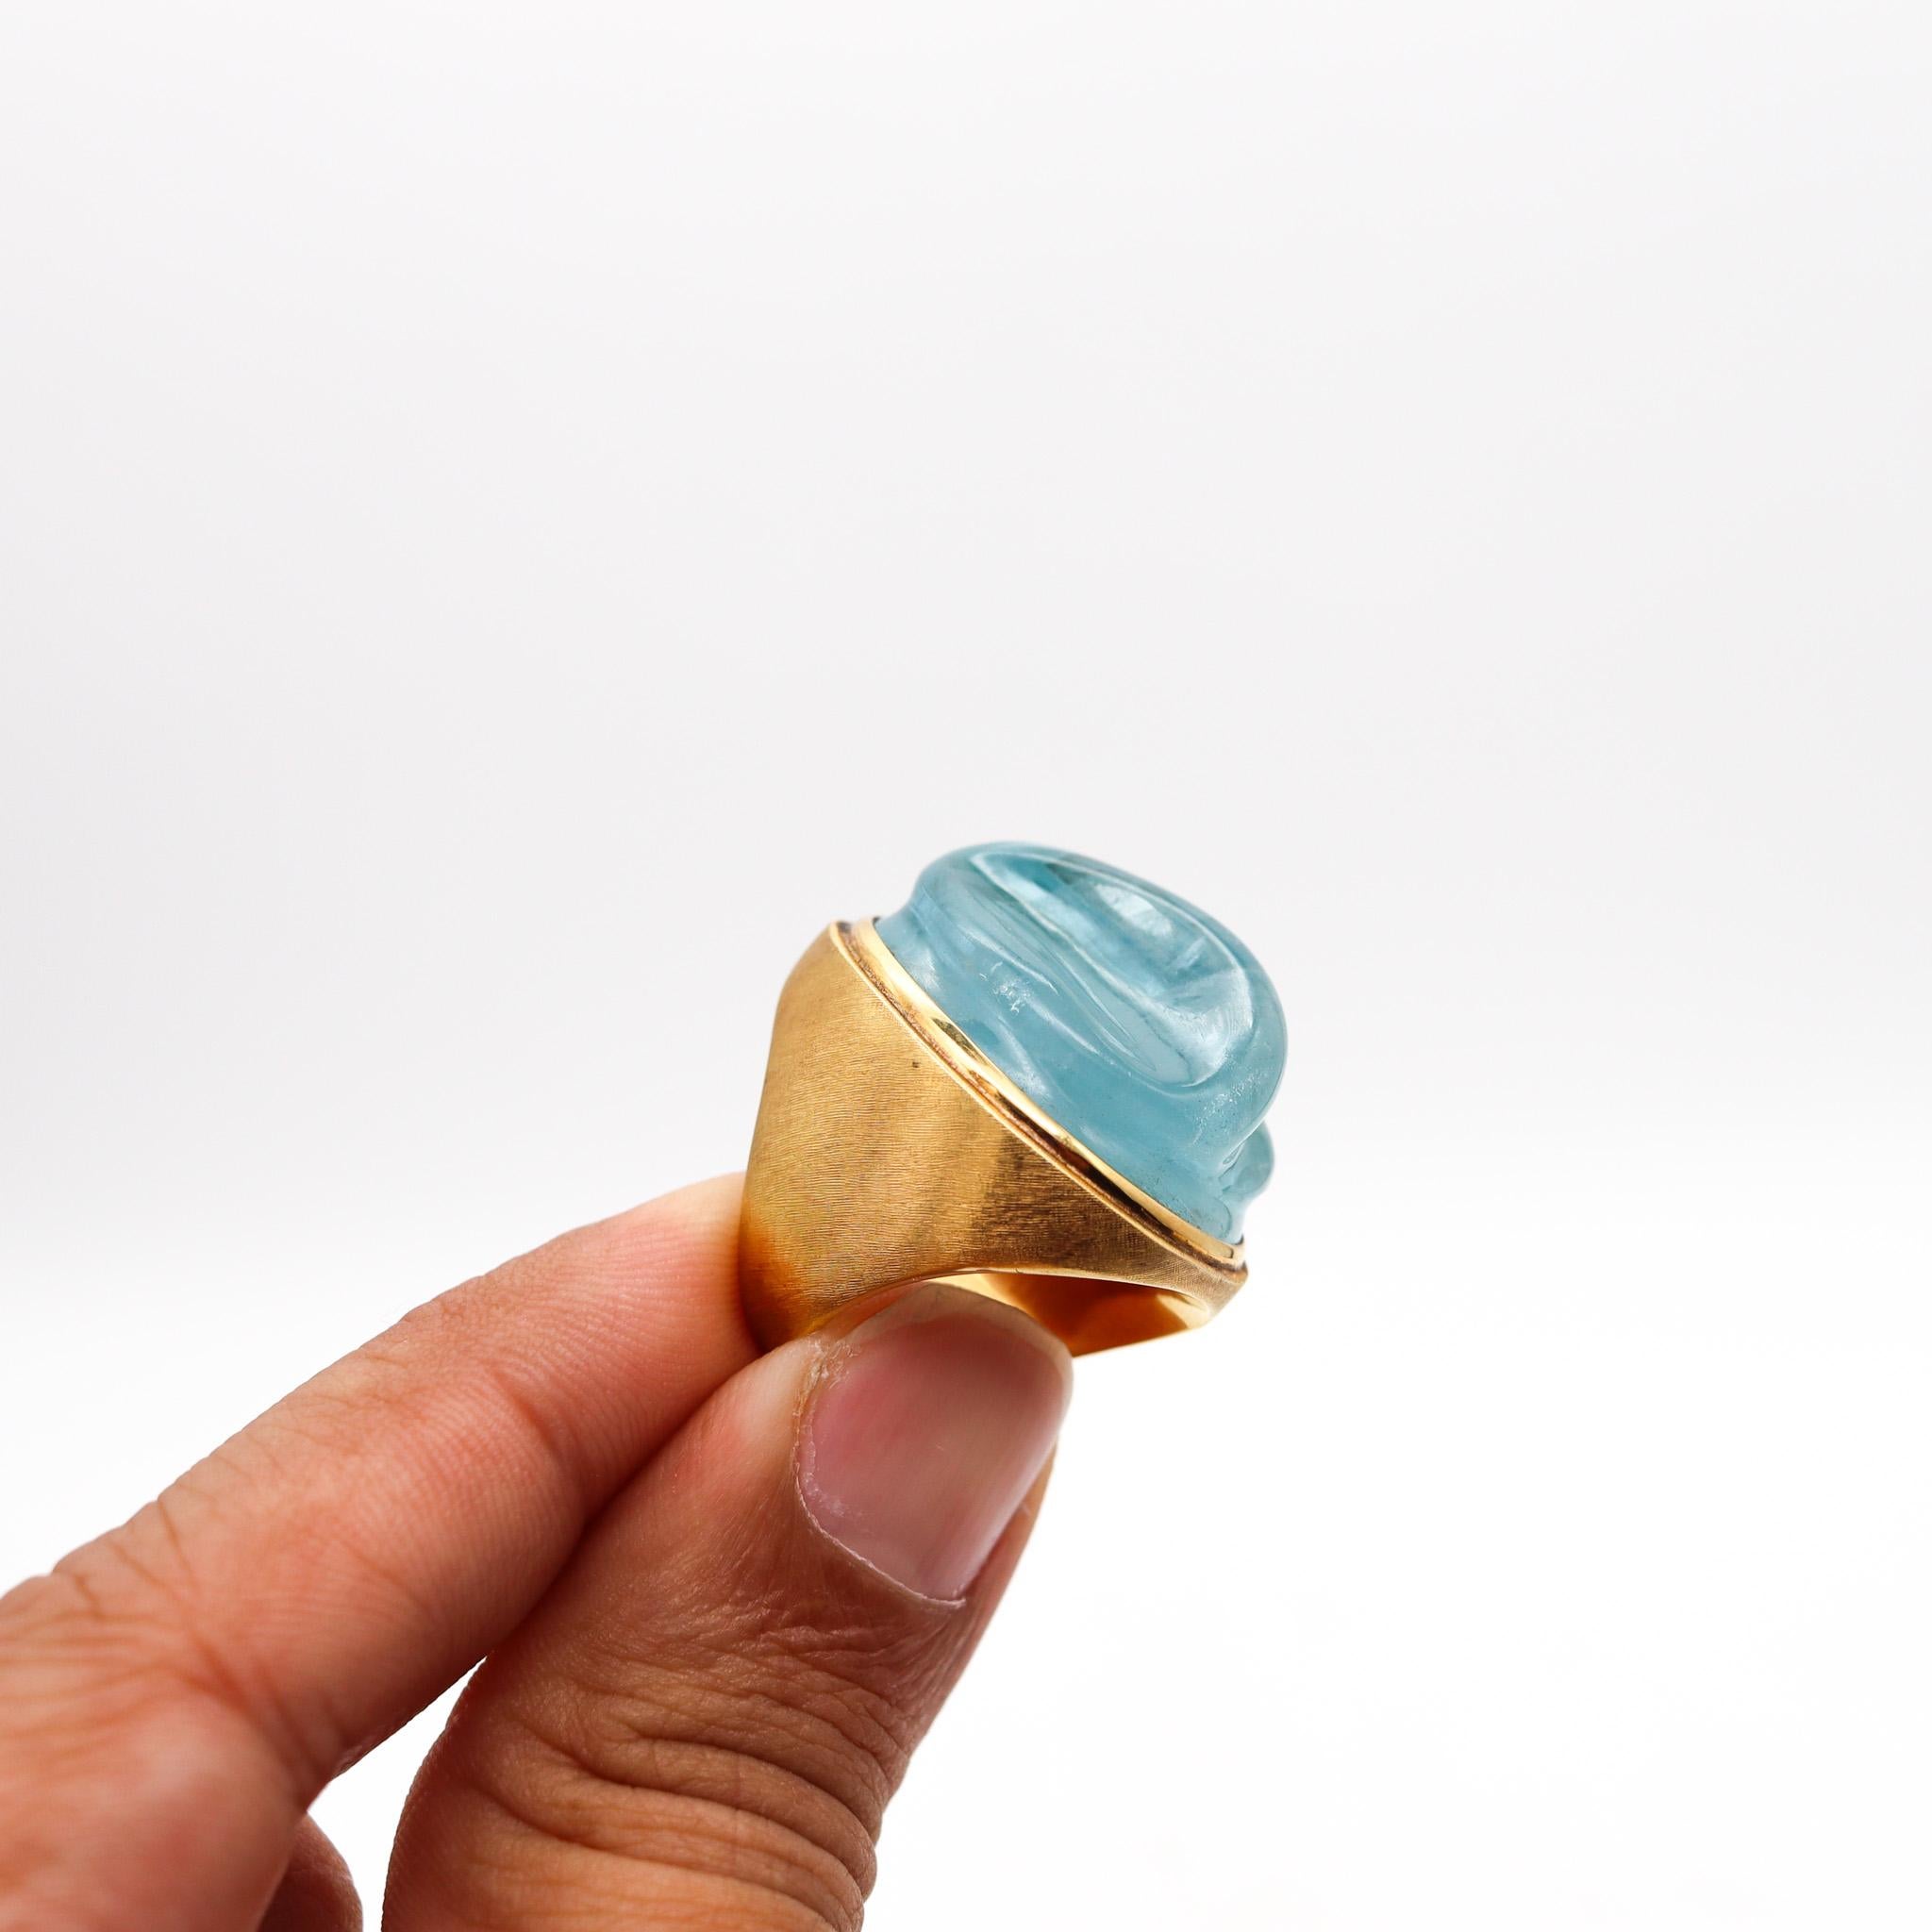 Women's or Men's Burle Marx Bruno Guidi 1970 Cocktail Ring 18Kt Yellow Gold and 35Cts Aquamarine